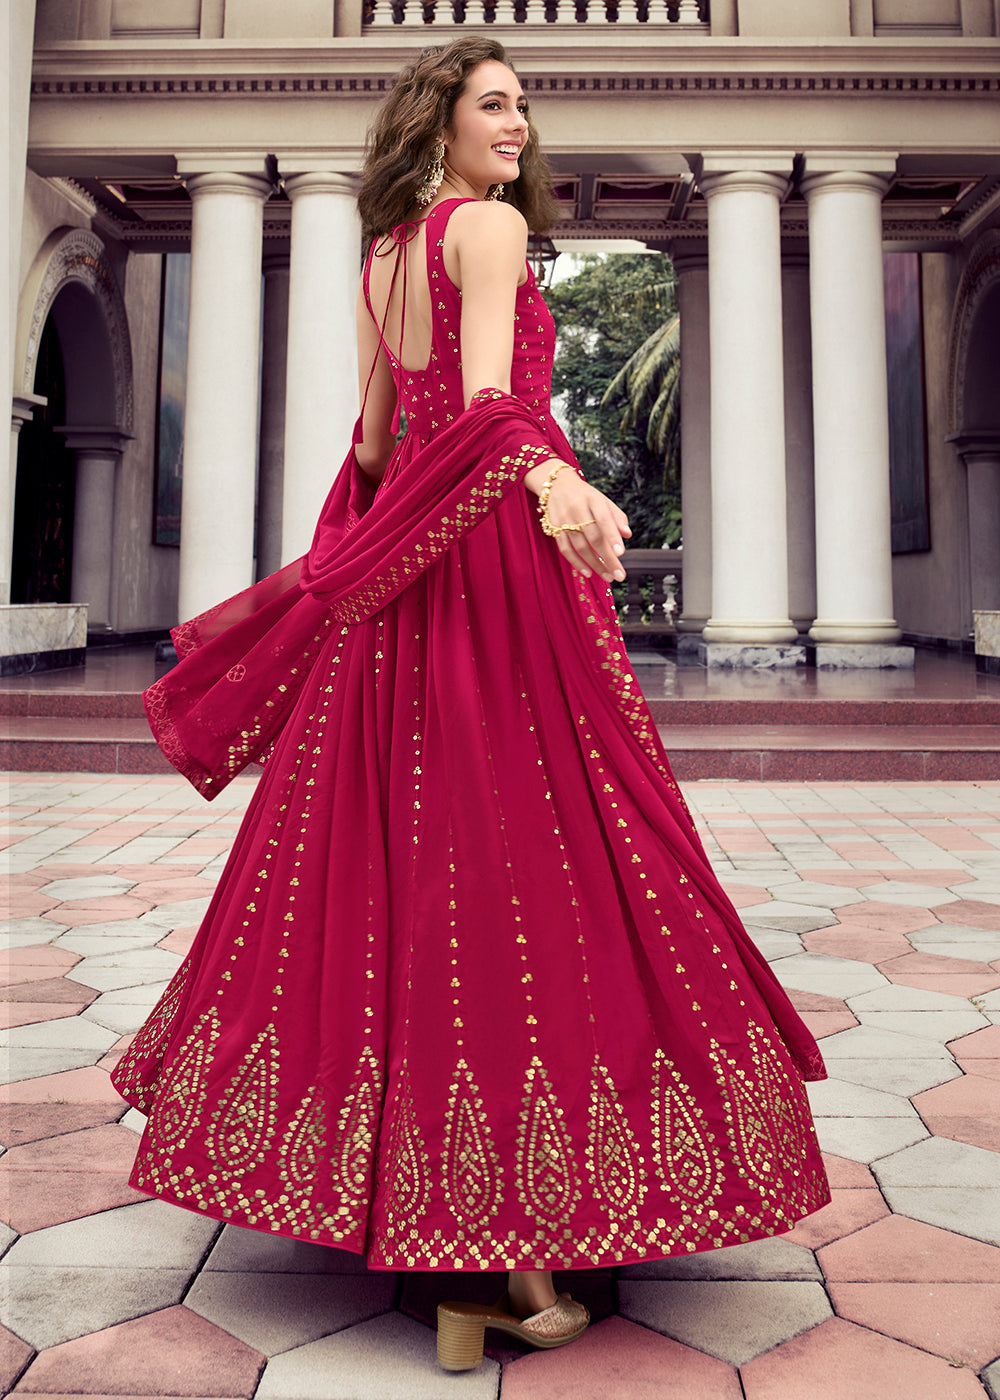 Pink georgette gown with heavy embroidery work koti shrug | Gowns, Shrug,  Designer gowns